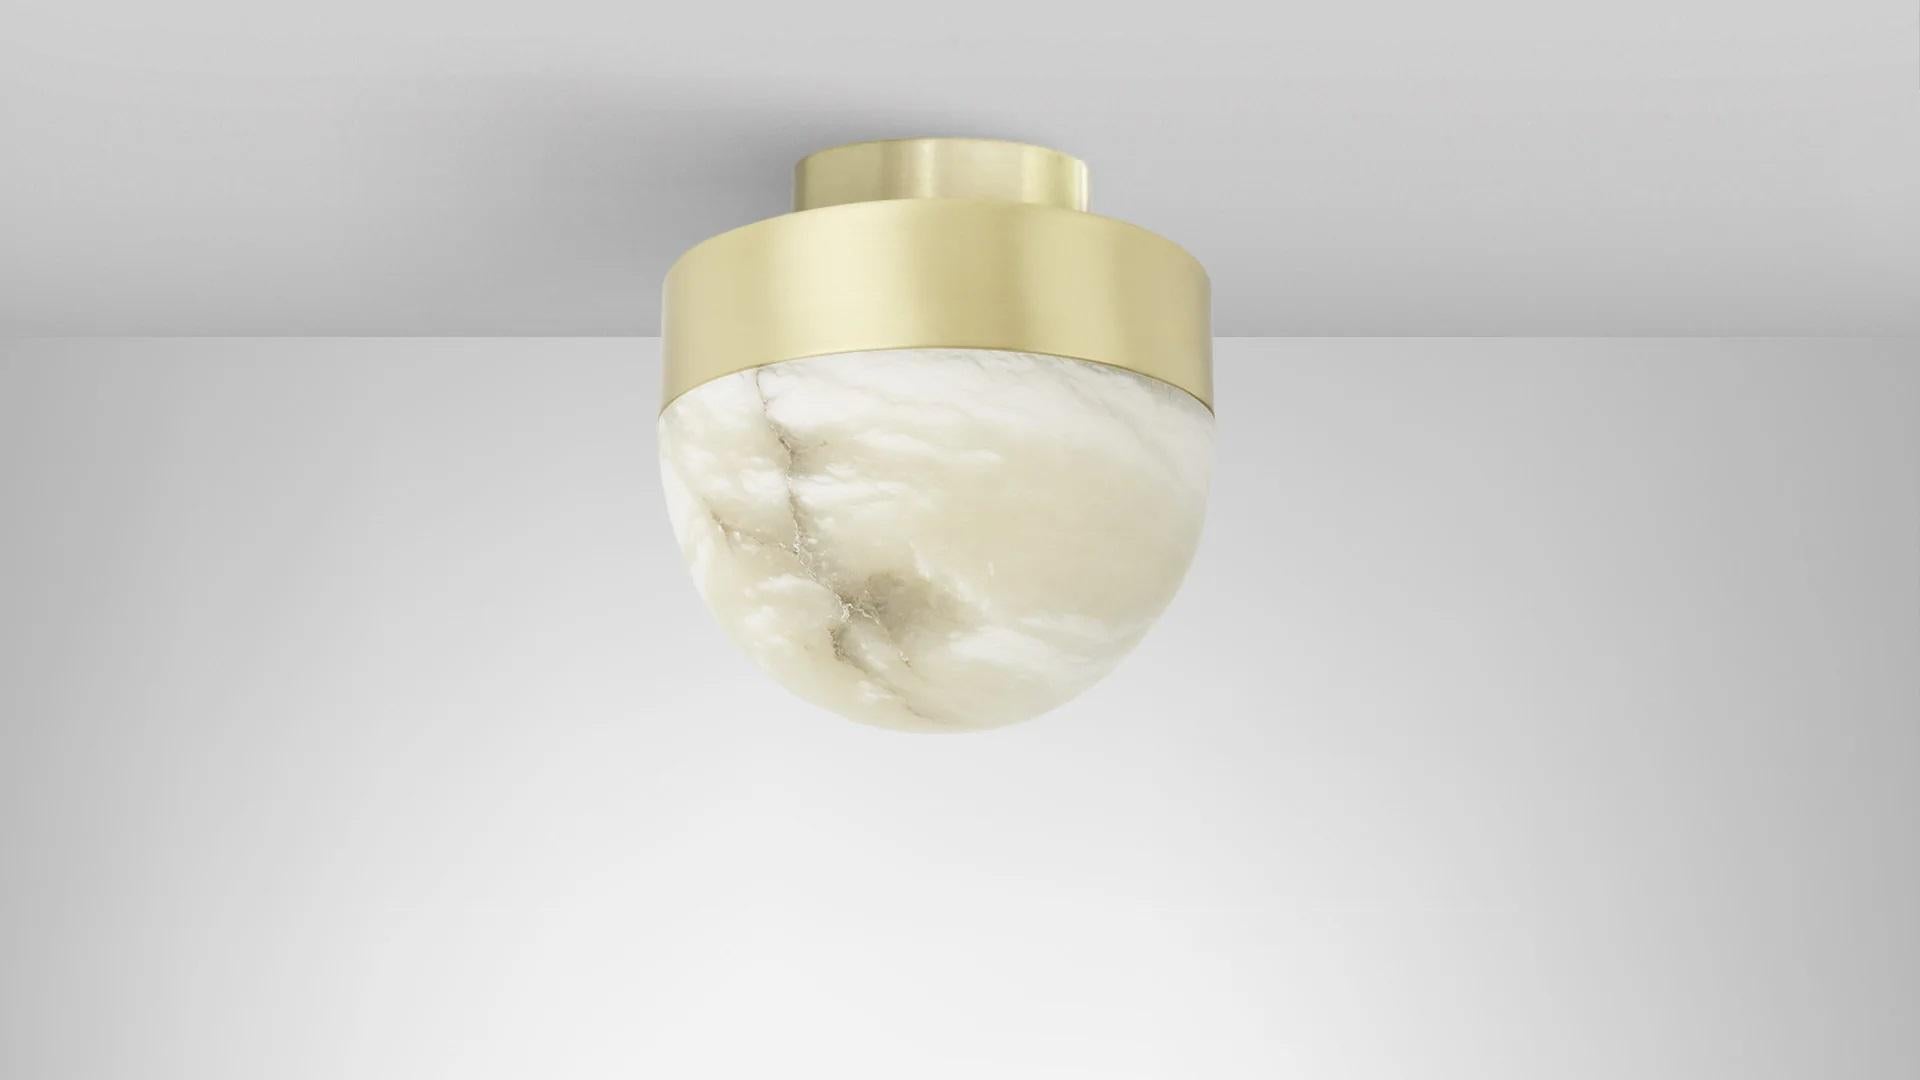 Lucid 200 flush lamp by CTO Lighting
Materials: honed alabaster with satin brass base.
Also available in honed alabaster with bronze base.
Dimensions: H 20 x W 20 cm

All our lamps can be wired according to each country. If sold to the USA it